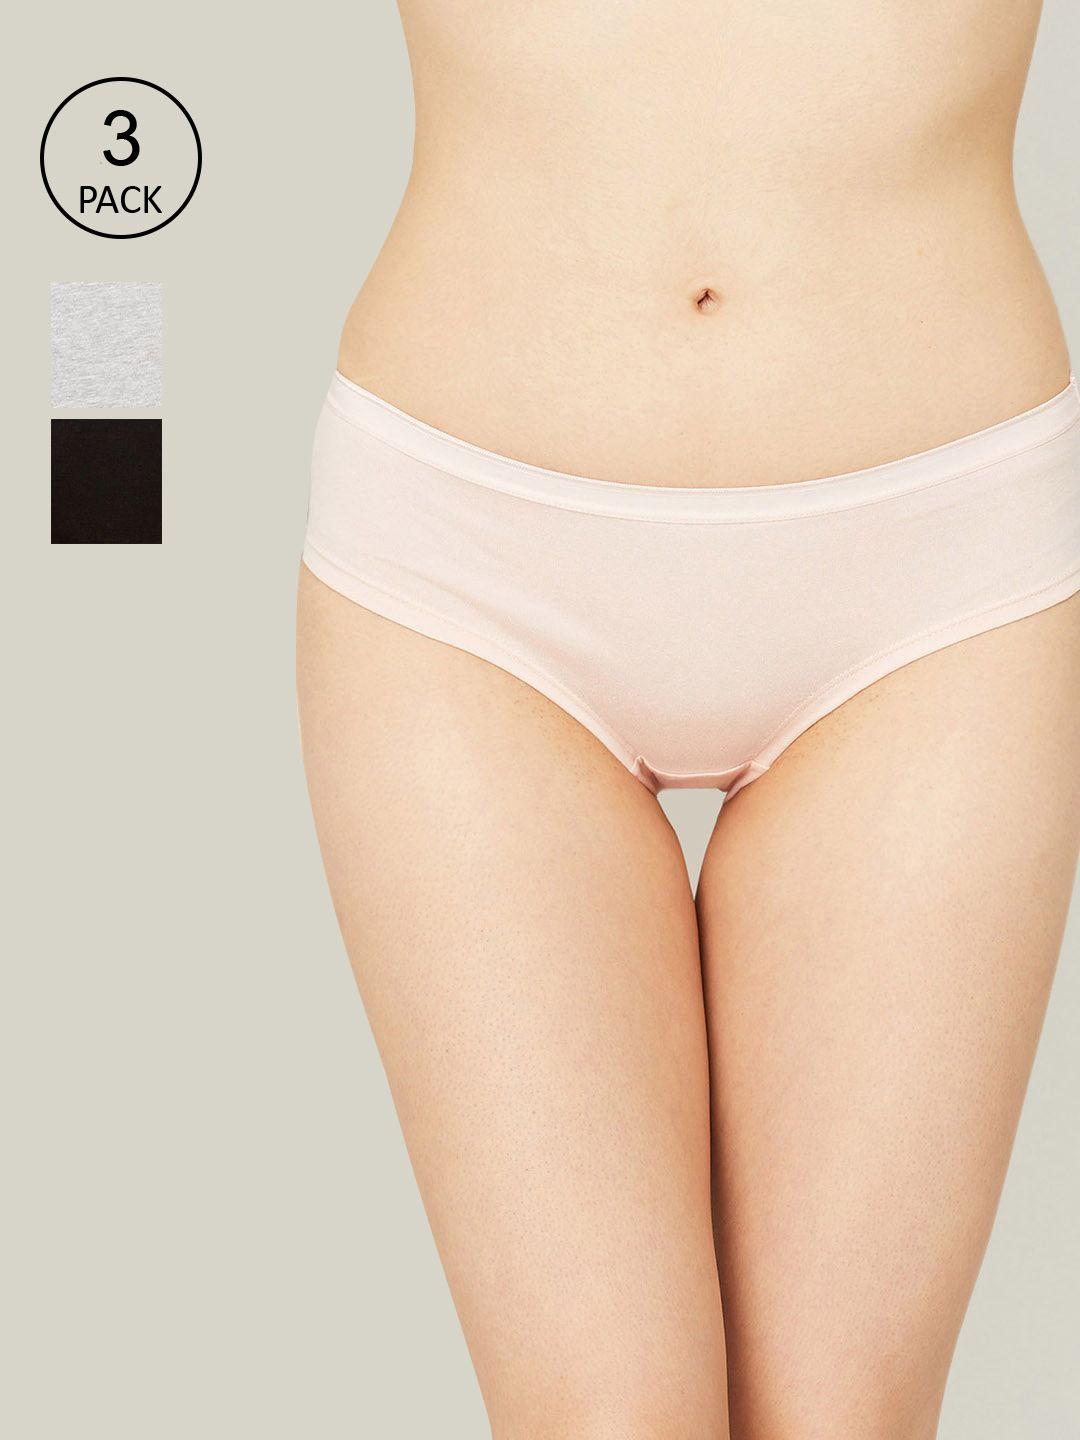 ginger-by-lifestyle-women-pack-of-3-assorted-cotton-hipster-briefs